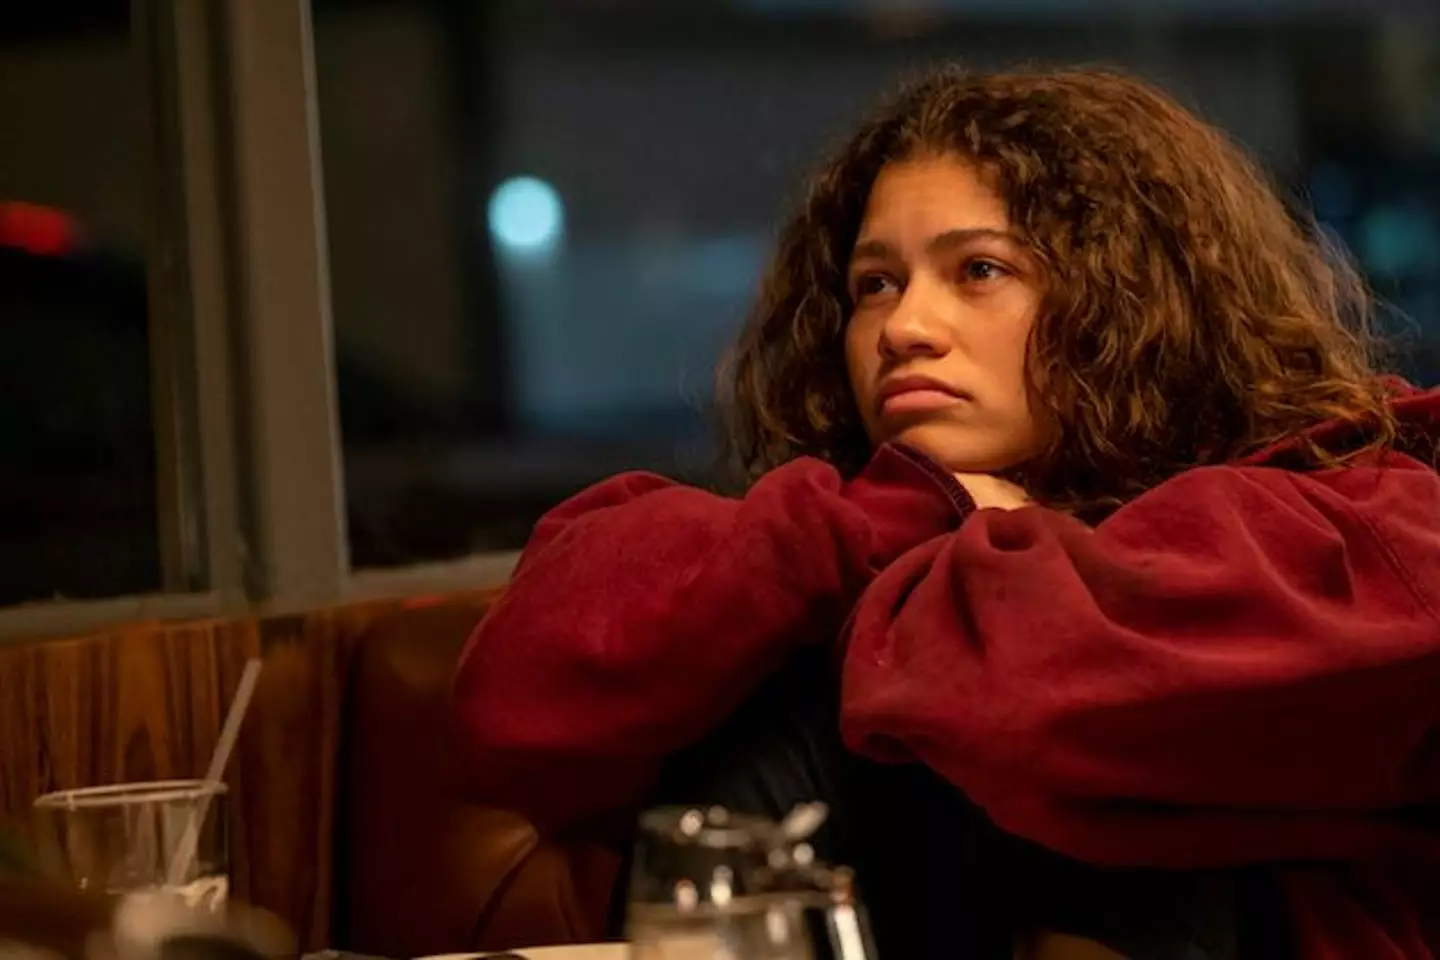 Fans had two interim episodes in 2021, one focusing on Rue and her sobriety journey (